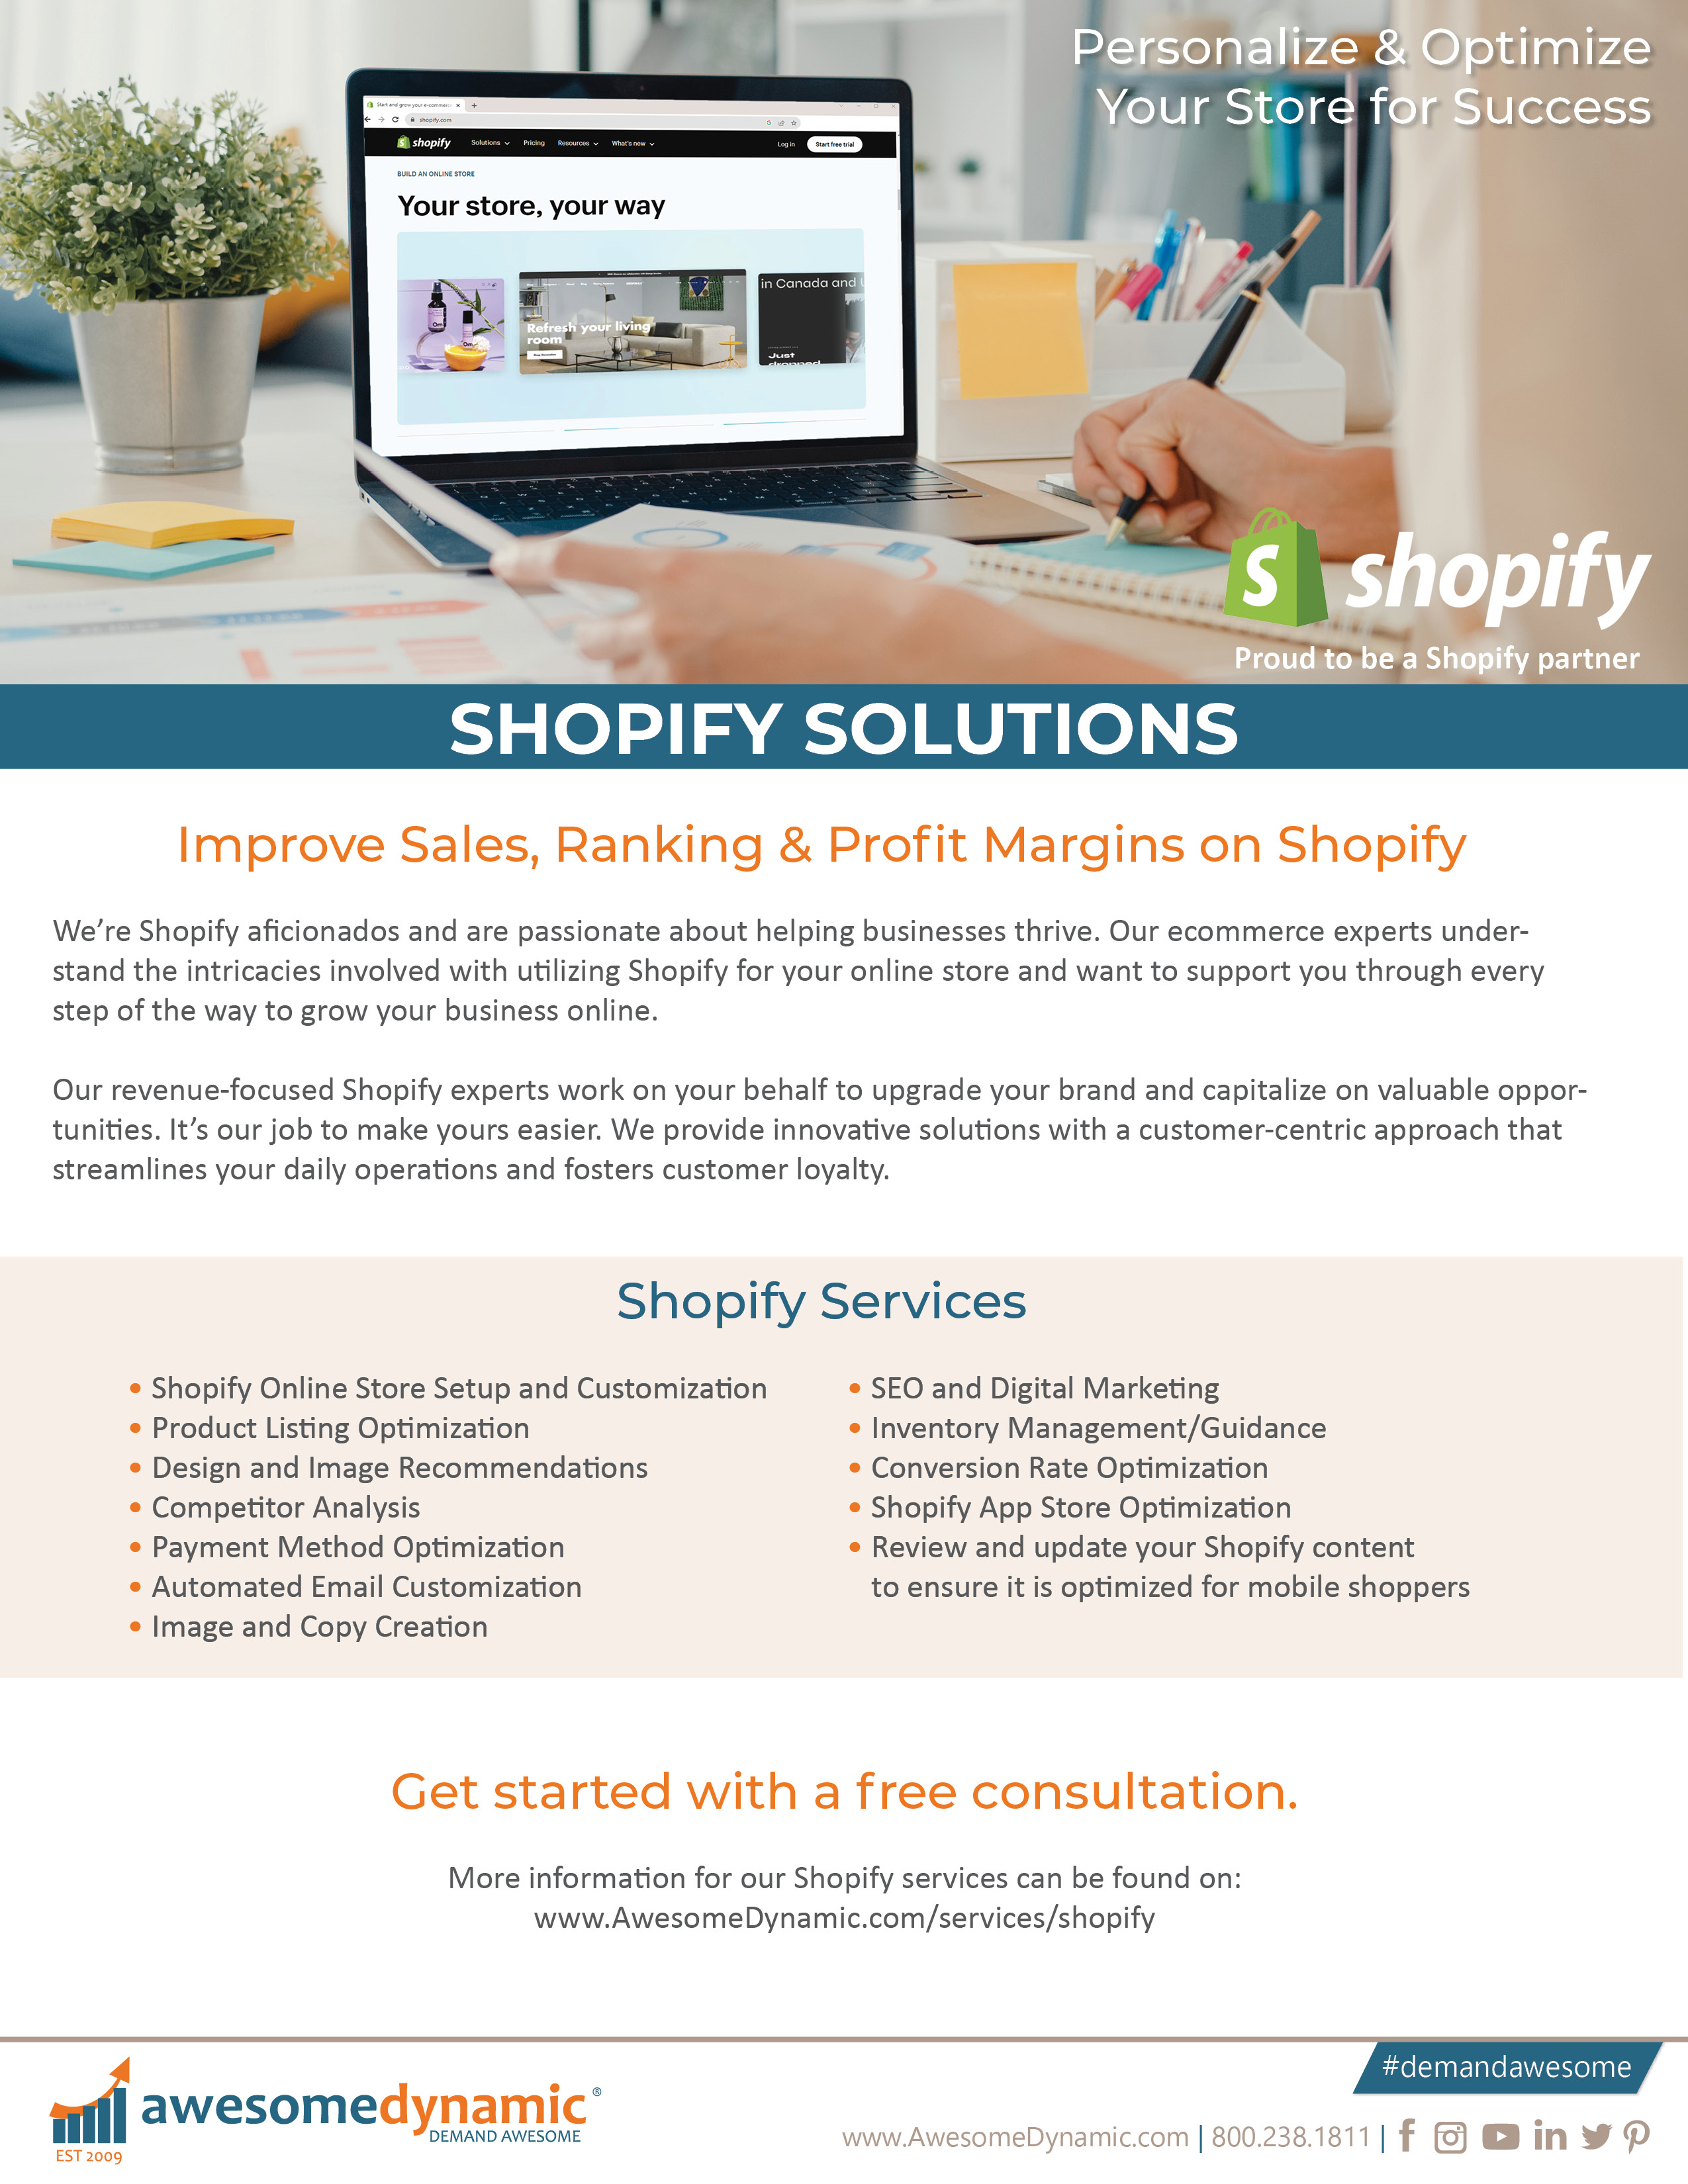 Sell on Shopify with expert assistance from Awesome Dynamic Tech Solutions, Inc. 